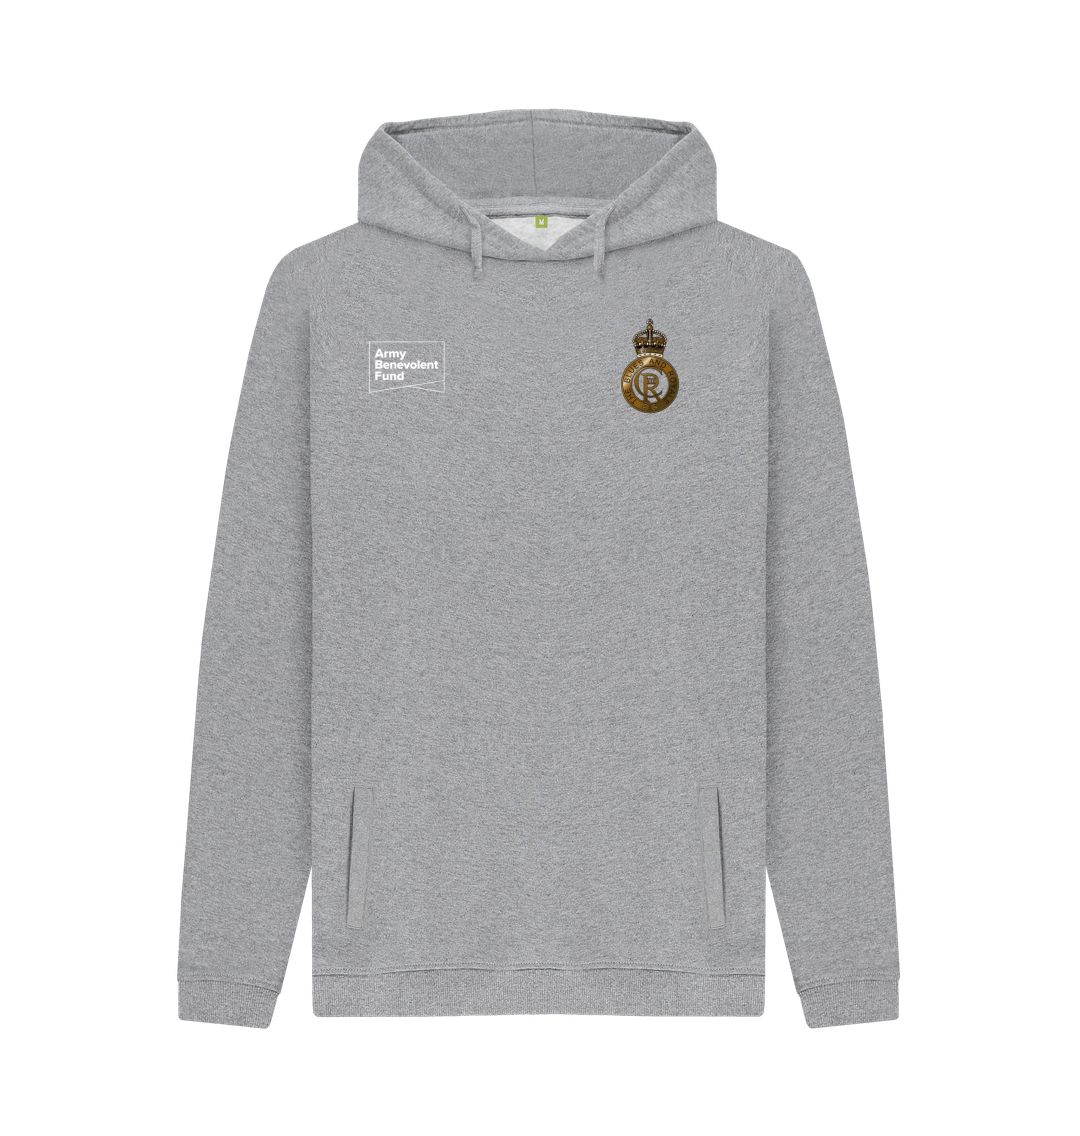 The Blues and Royals Unisex Hoodie - Army Benevolent Fund